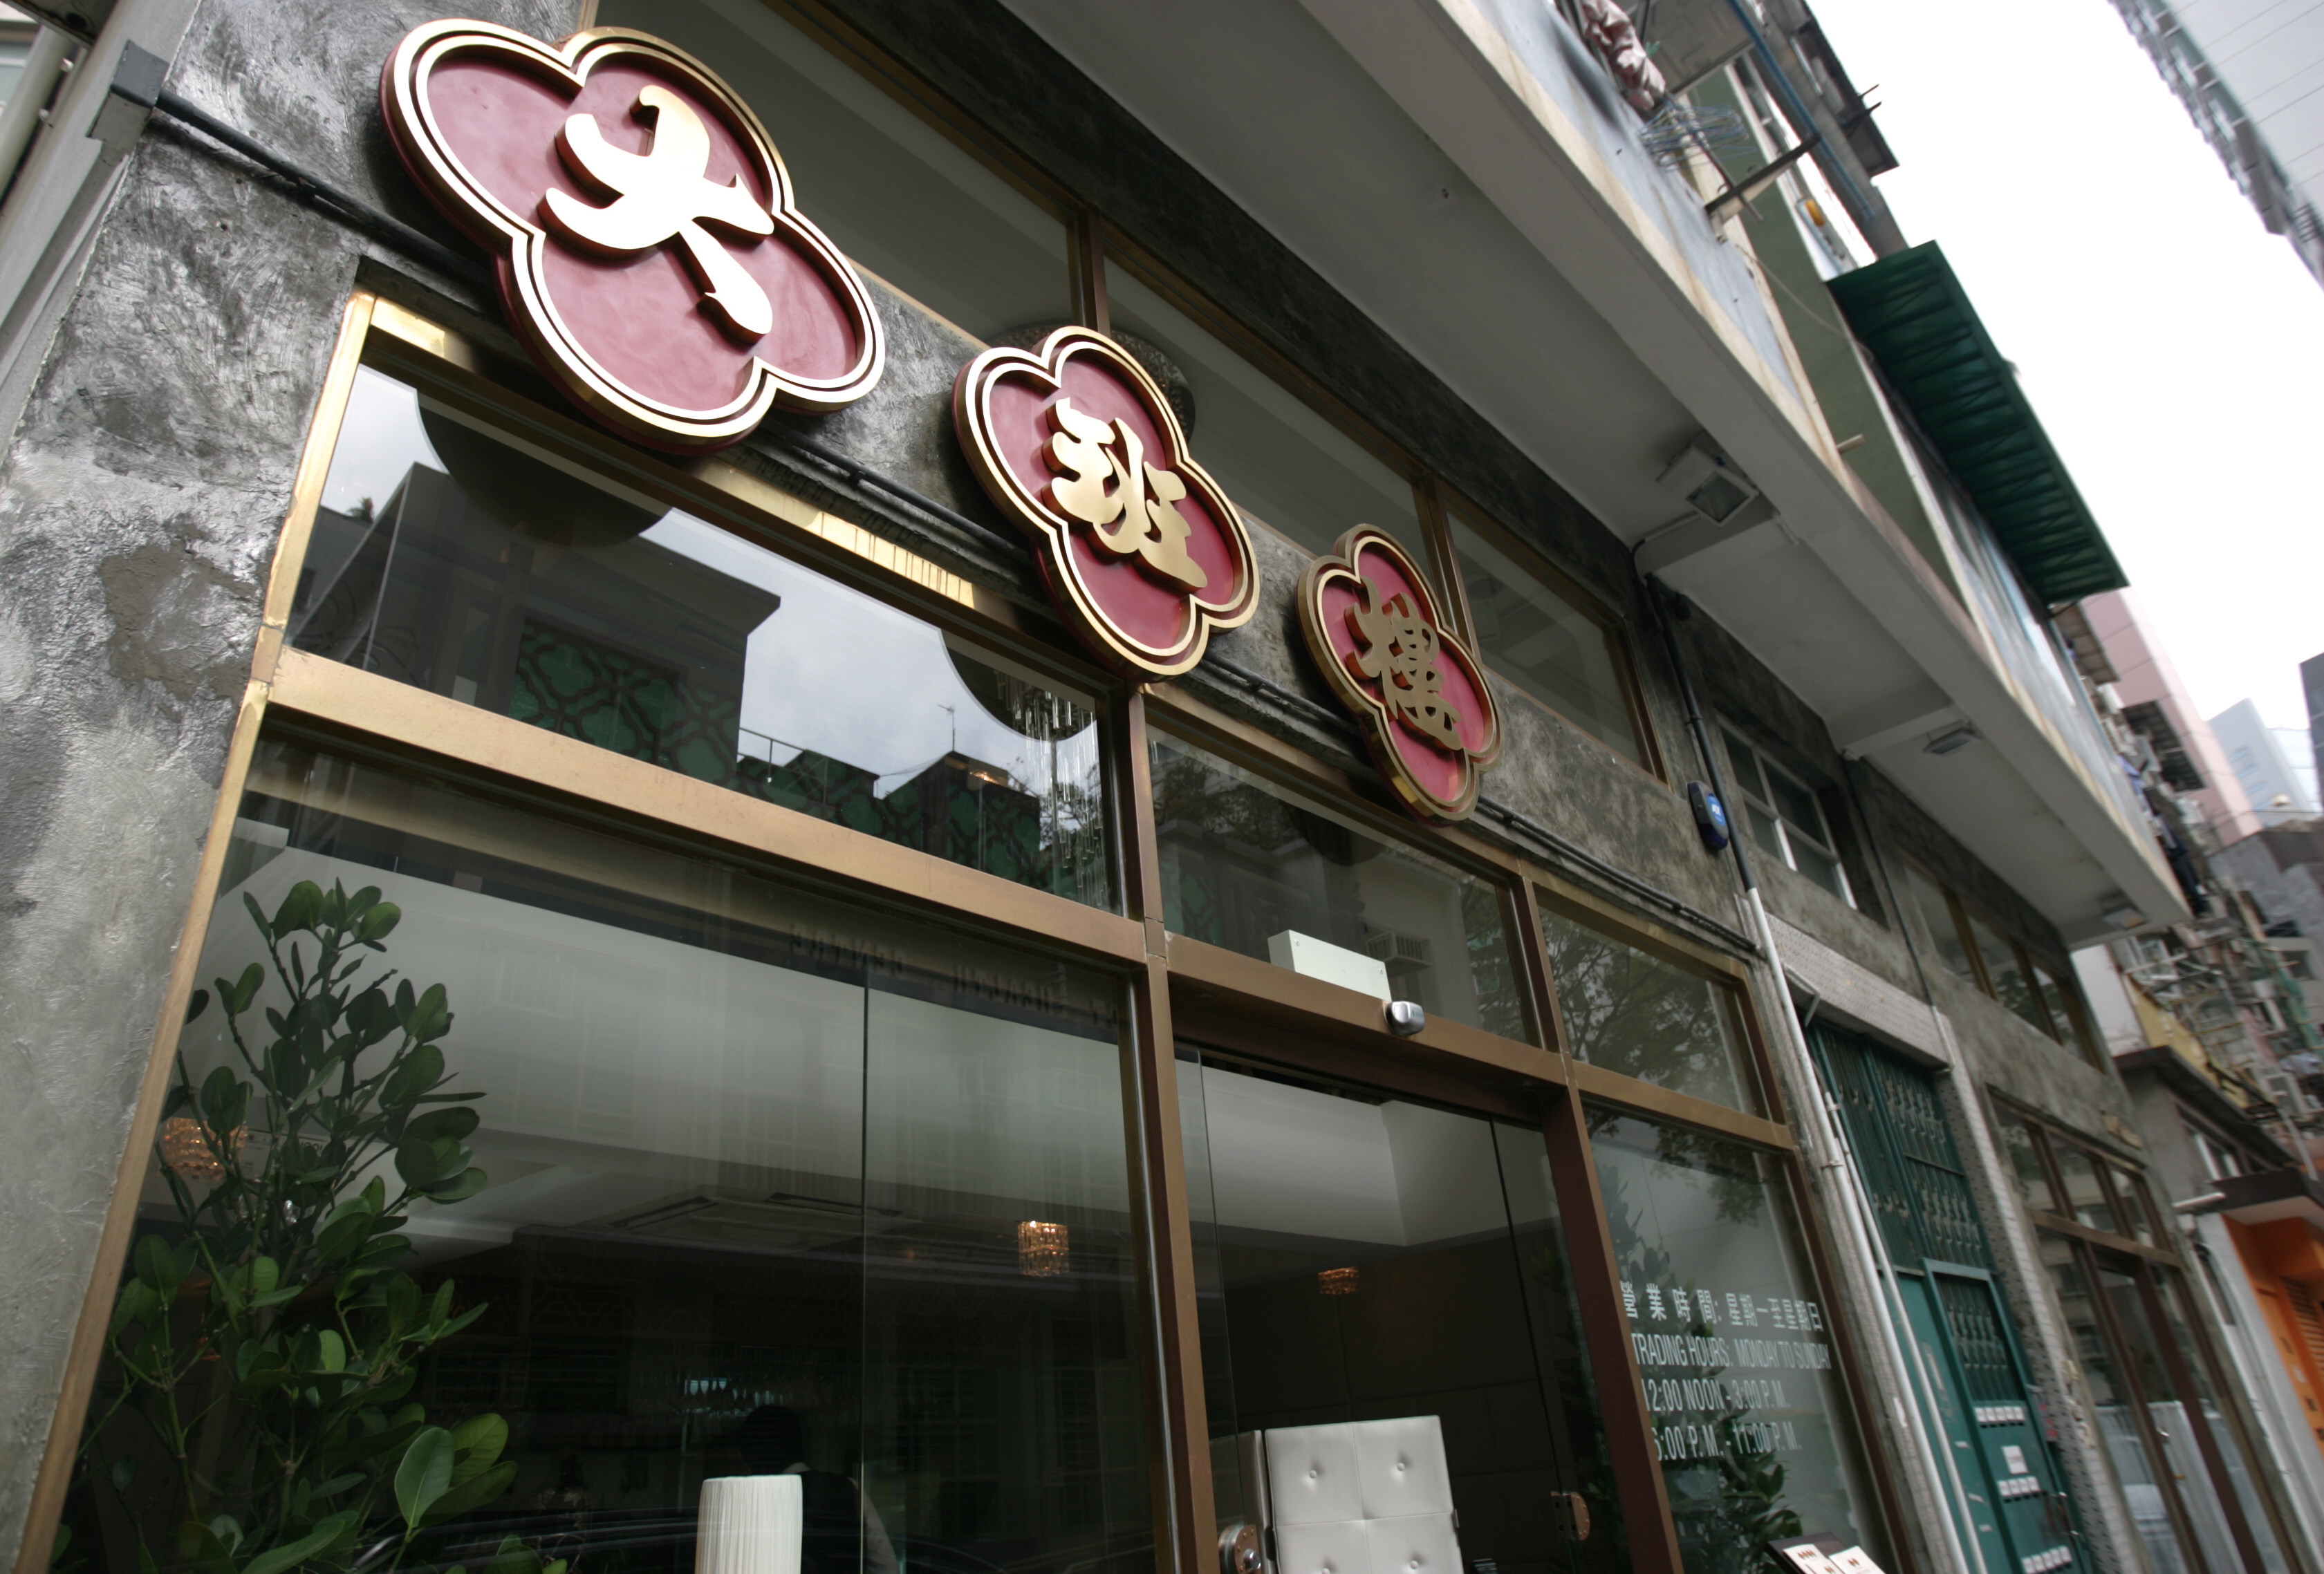 The Chairman is reputedly one of the hottest Chinese restaurants in Hong Kong. Photo: SCMP / Felix Wong